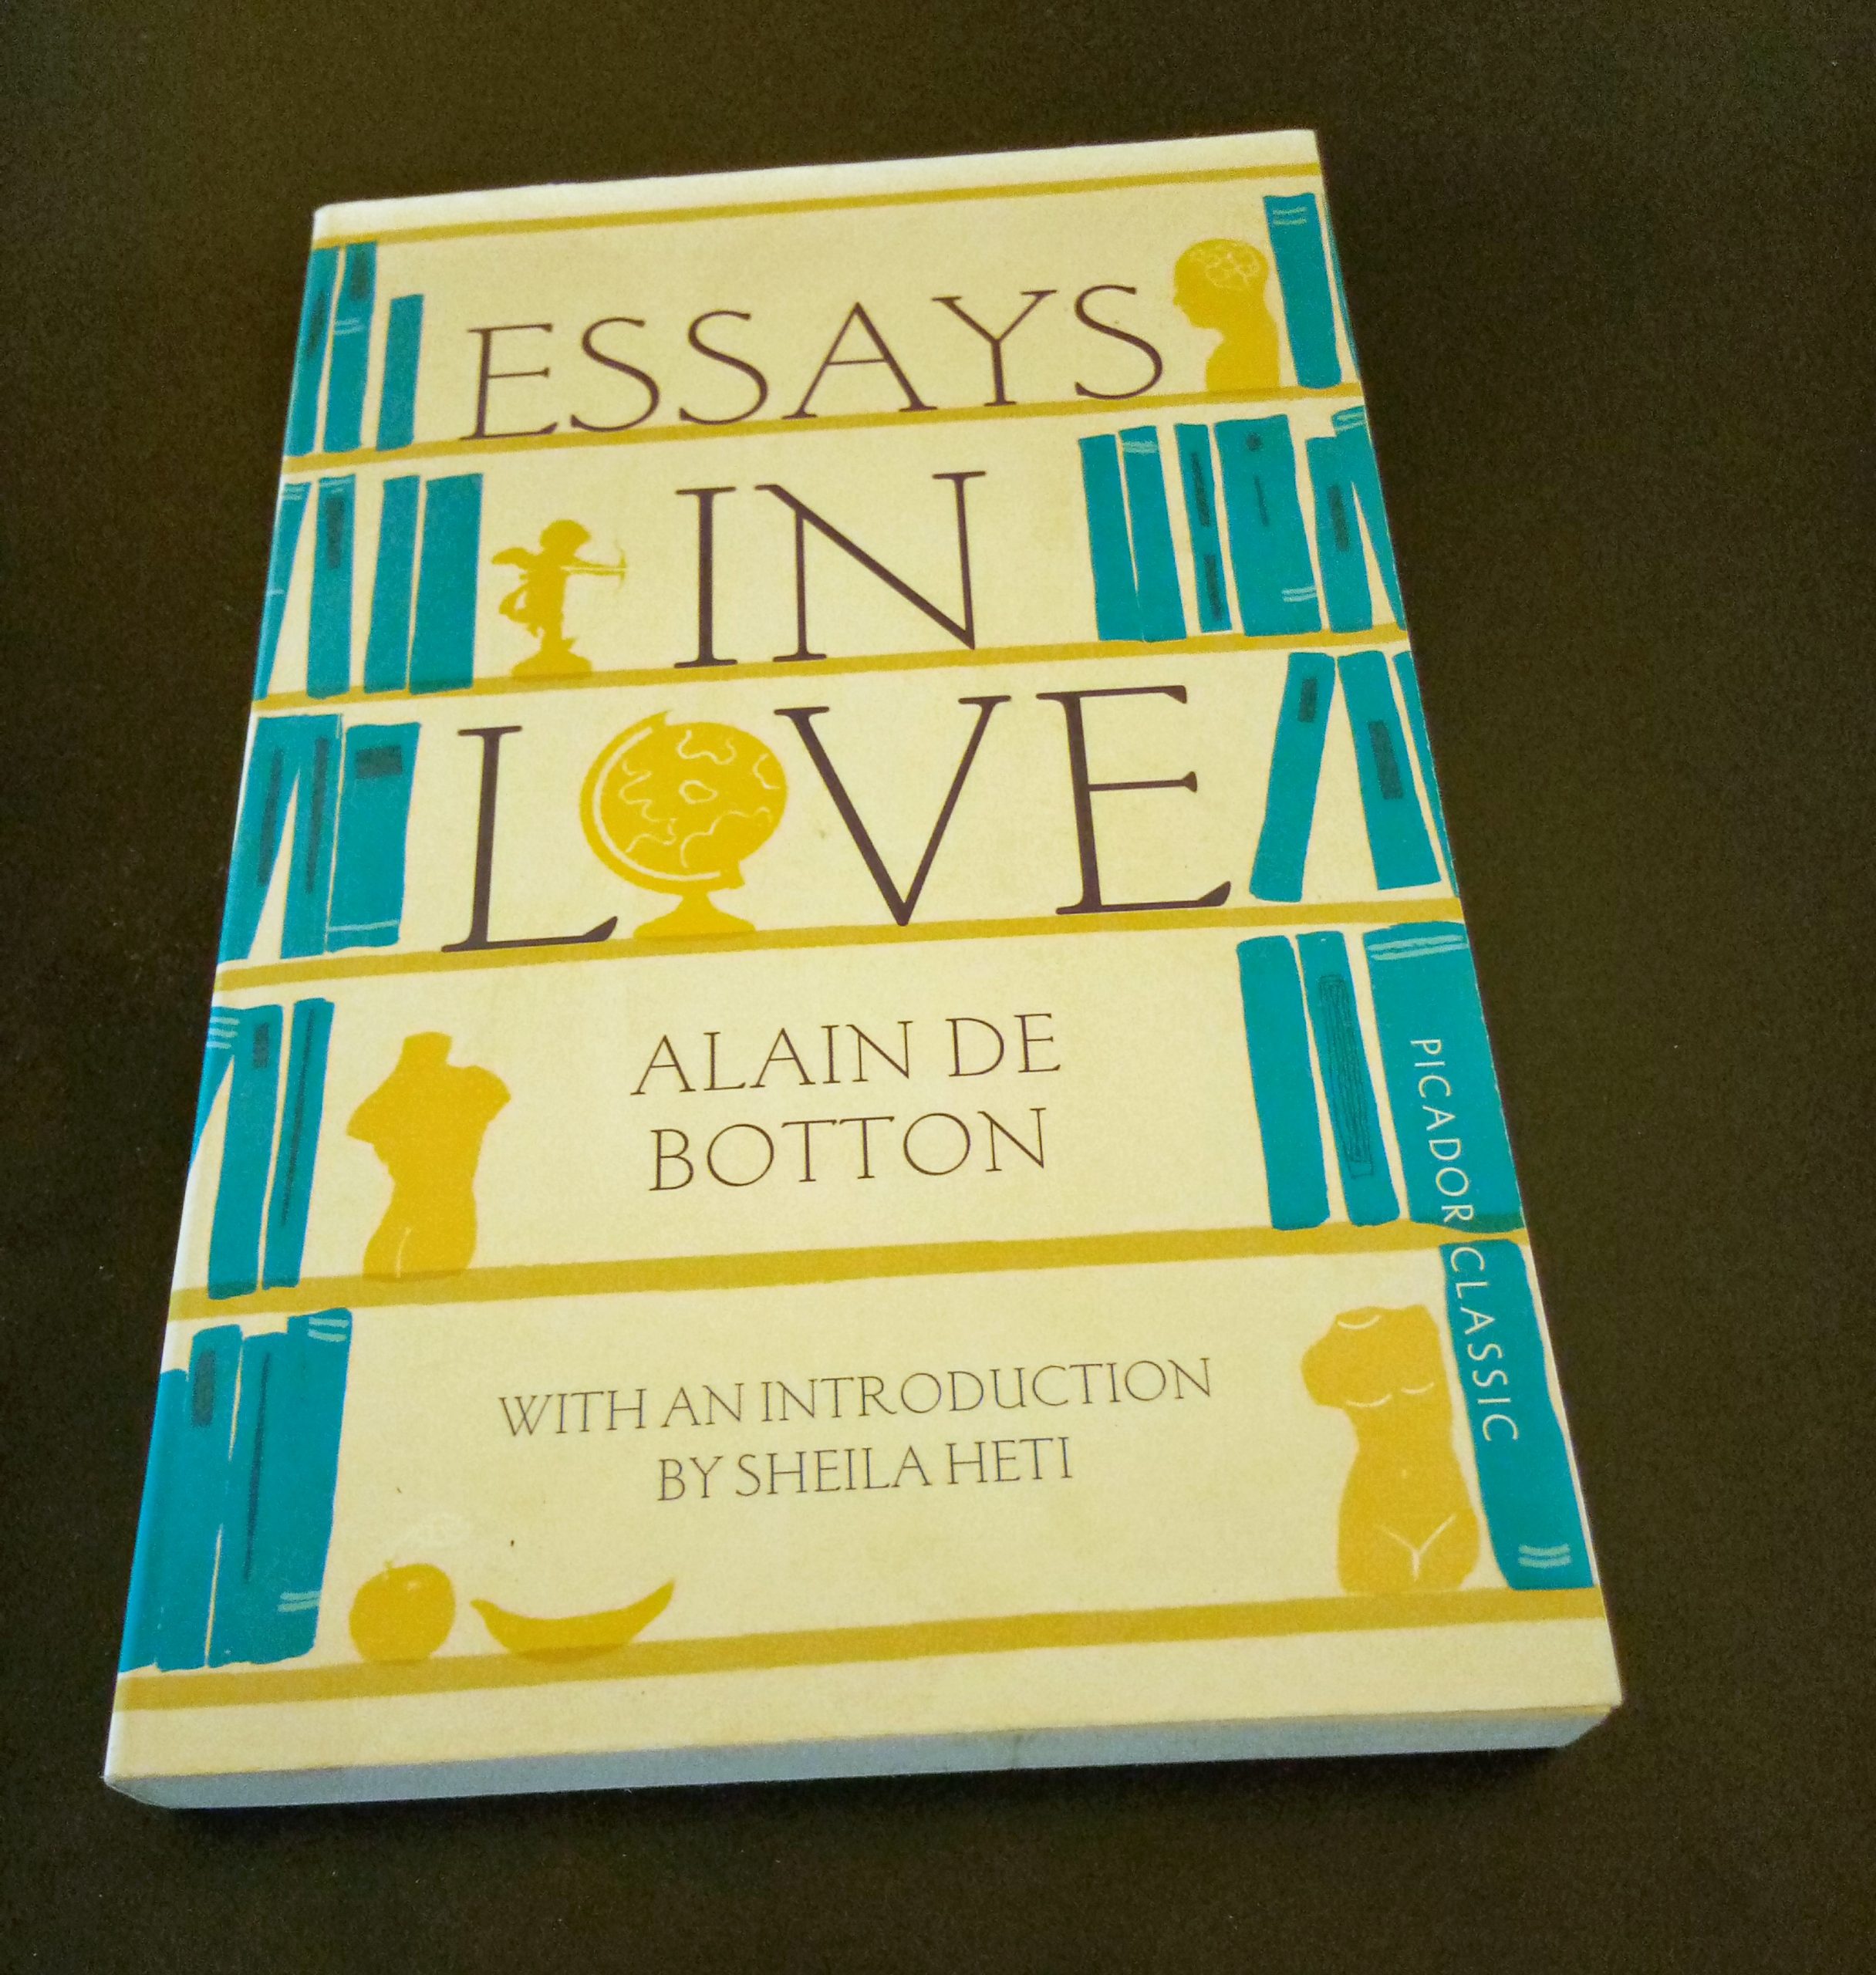 Alain de botton essays on love review how to write a reflective essay in apa format